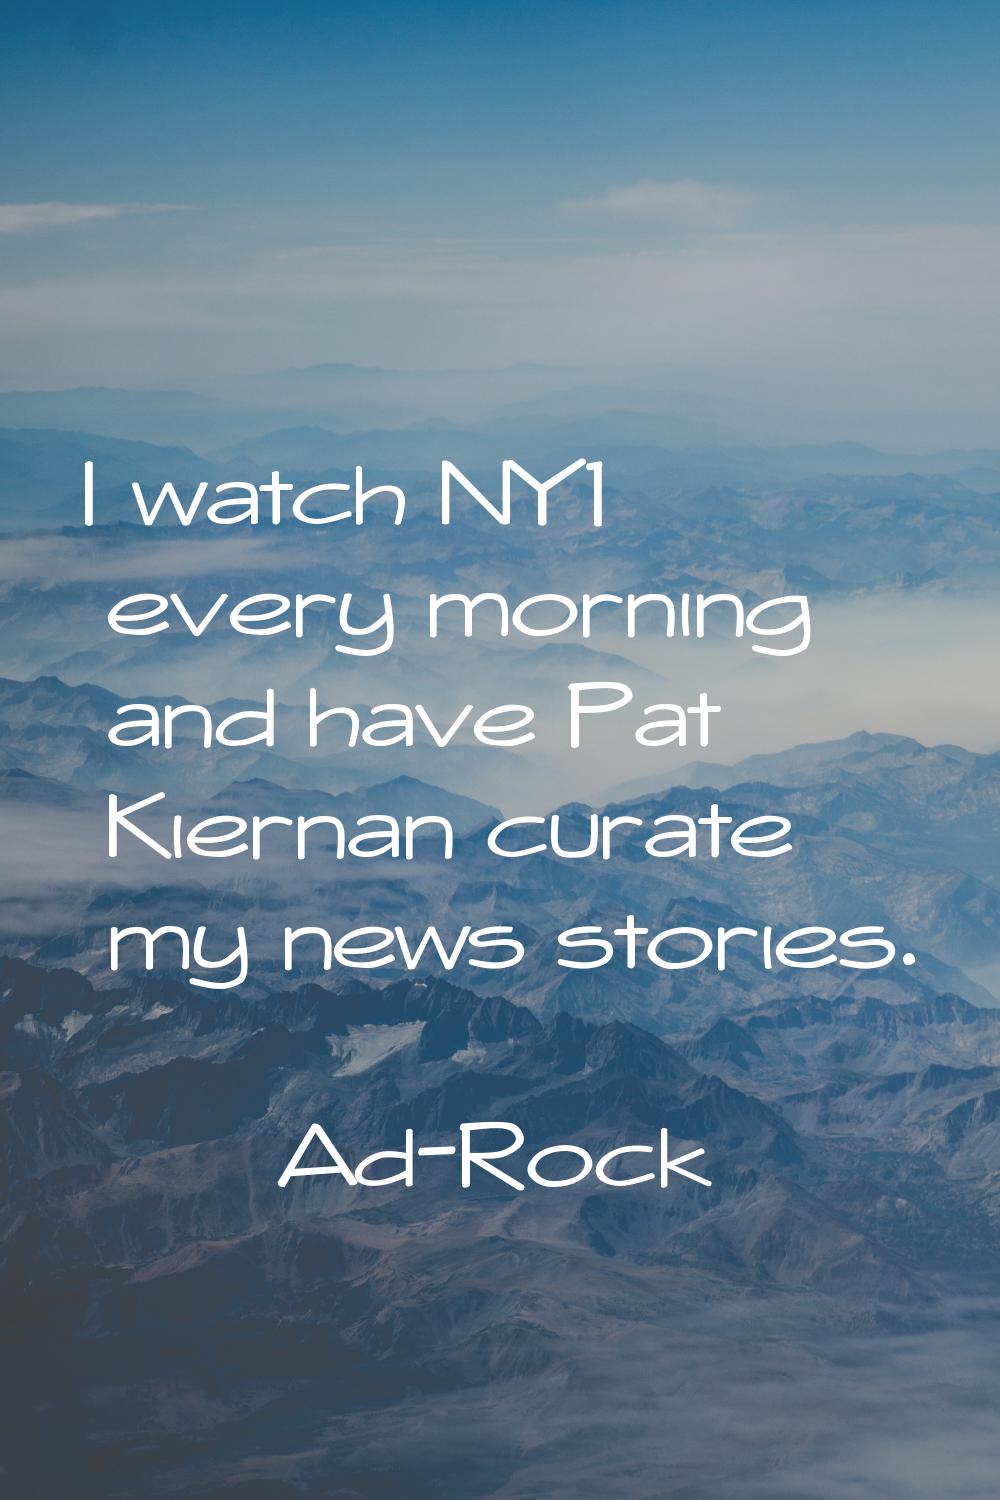 I watch NY1 every morning and have Pat Kiernan curate my news stories.